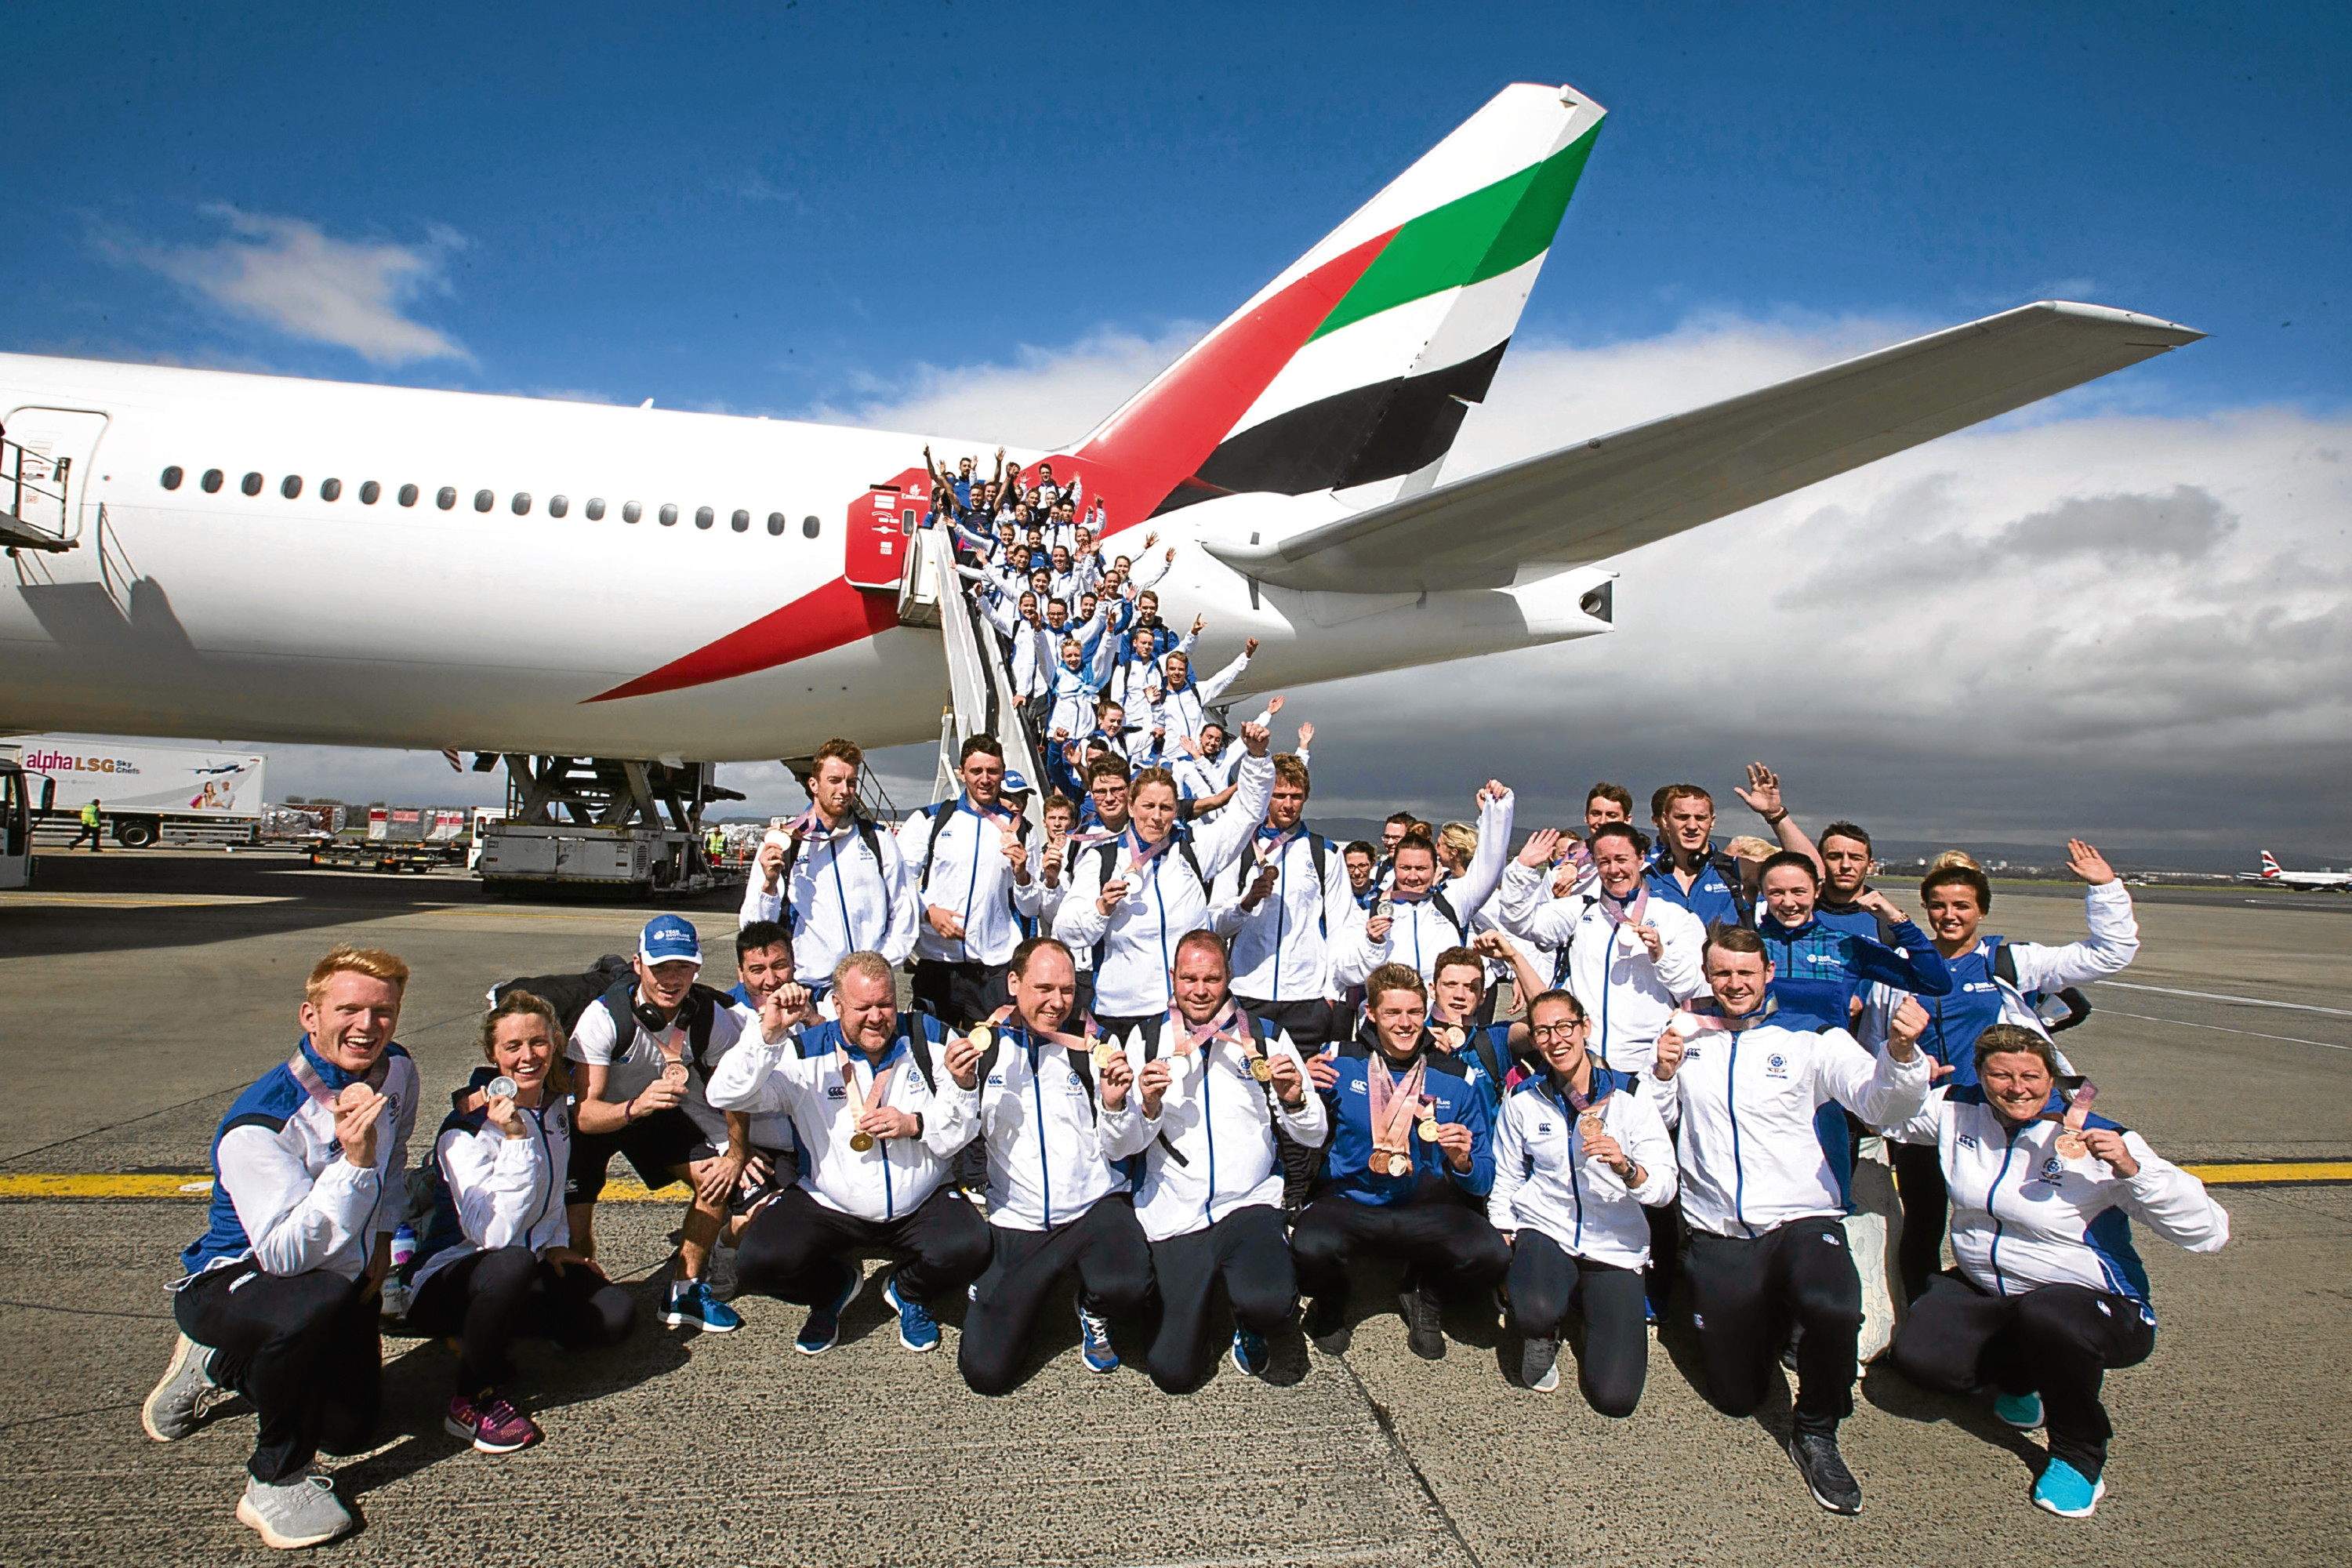 Handout photo dated 17/04/18 provided by Jeff Holmes of Team Scotland athletes arrive at Glasgow airport following the conclusion of the 2018 Gold Coast Commonwealth Games. PRESS ASSOCIATION Photo. Issue date: Tuesday April 17, 2018. See PA story COMMONWEALTH Scotland. Photo credit should read: Jeff Holmes/PA Wire. NOTE TO EDITORS: This handout photo may only be used in for editorial reporting purposes for the contemporaneous illustration of events, things or the people in the image or facts mentioned in the caption. Reuse of the picture may require further permission from the copyright holder.